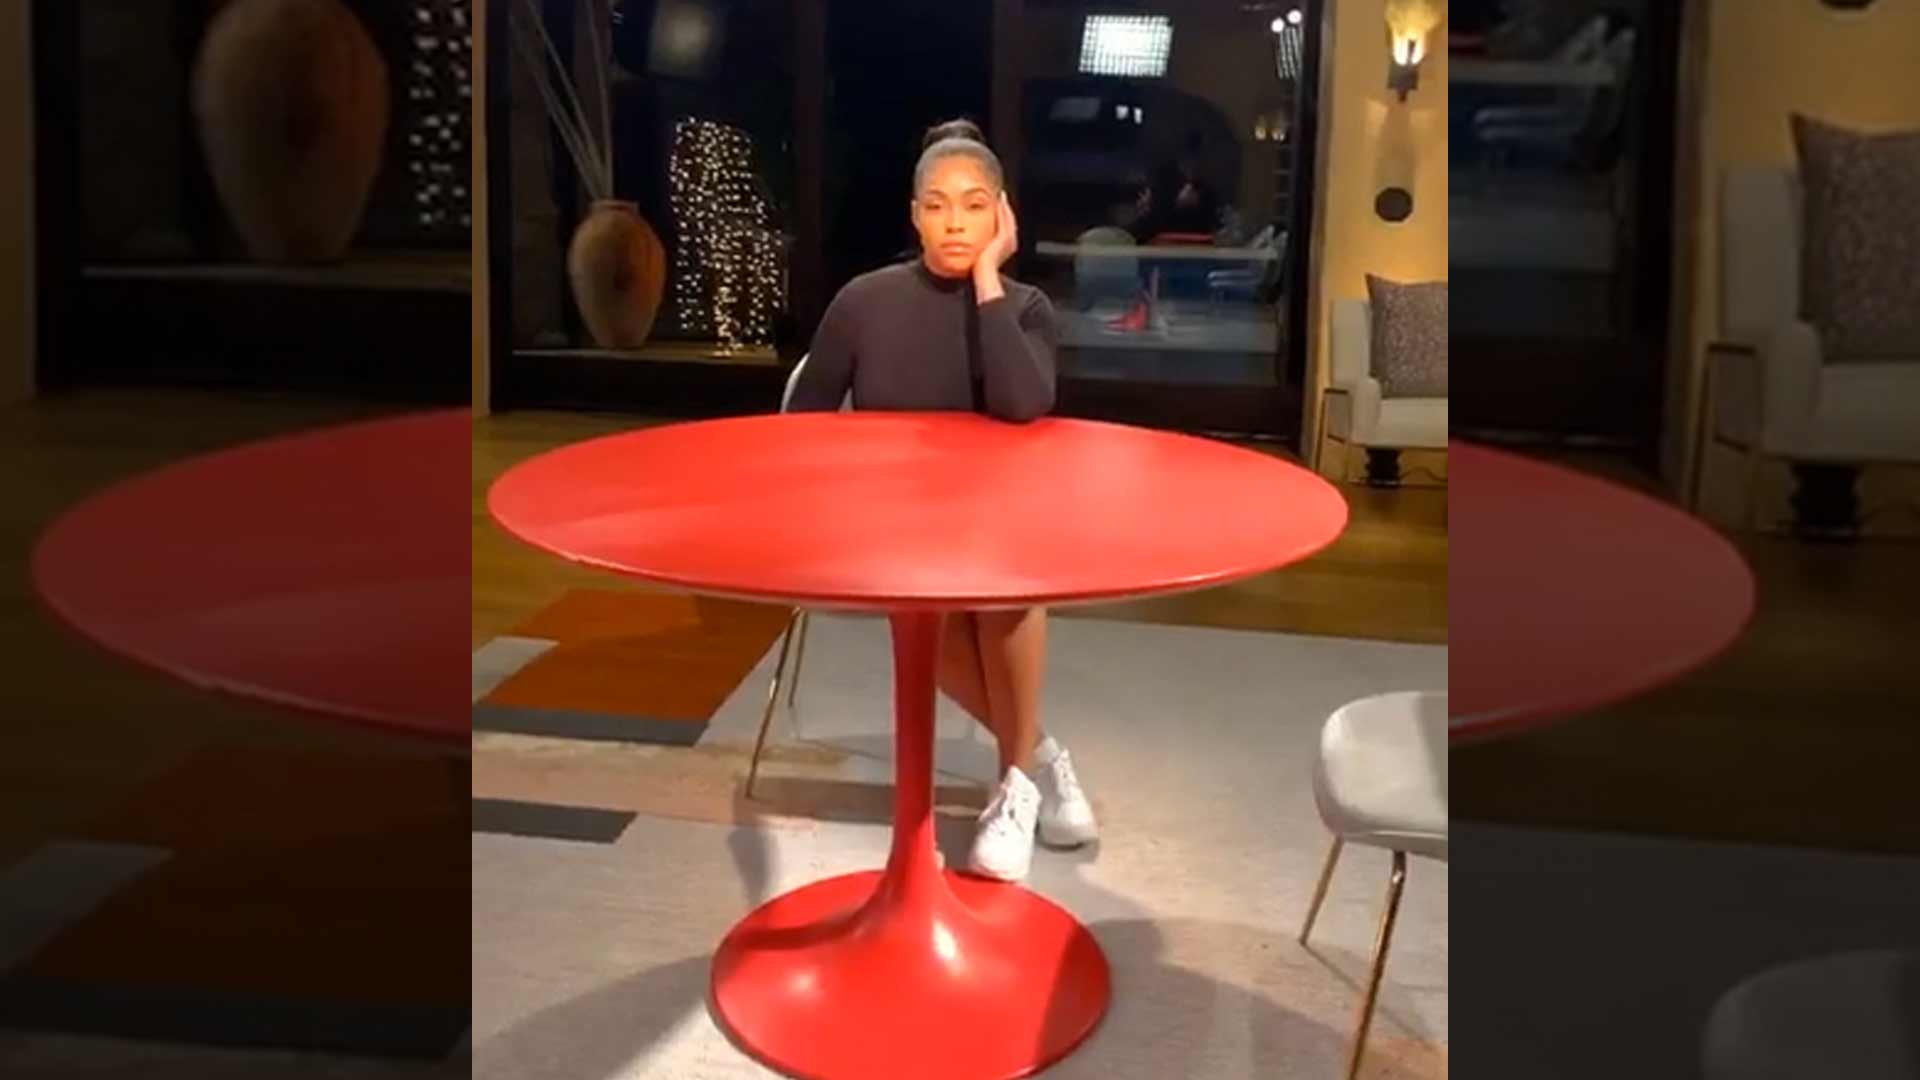 Jordyn Woods Takes A Seat At The Red Table With Jada Pinkett Smith